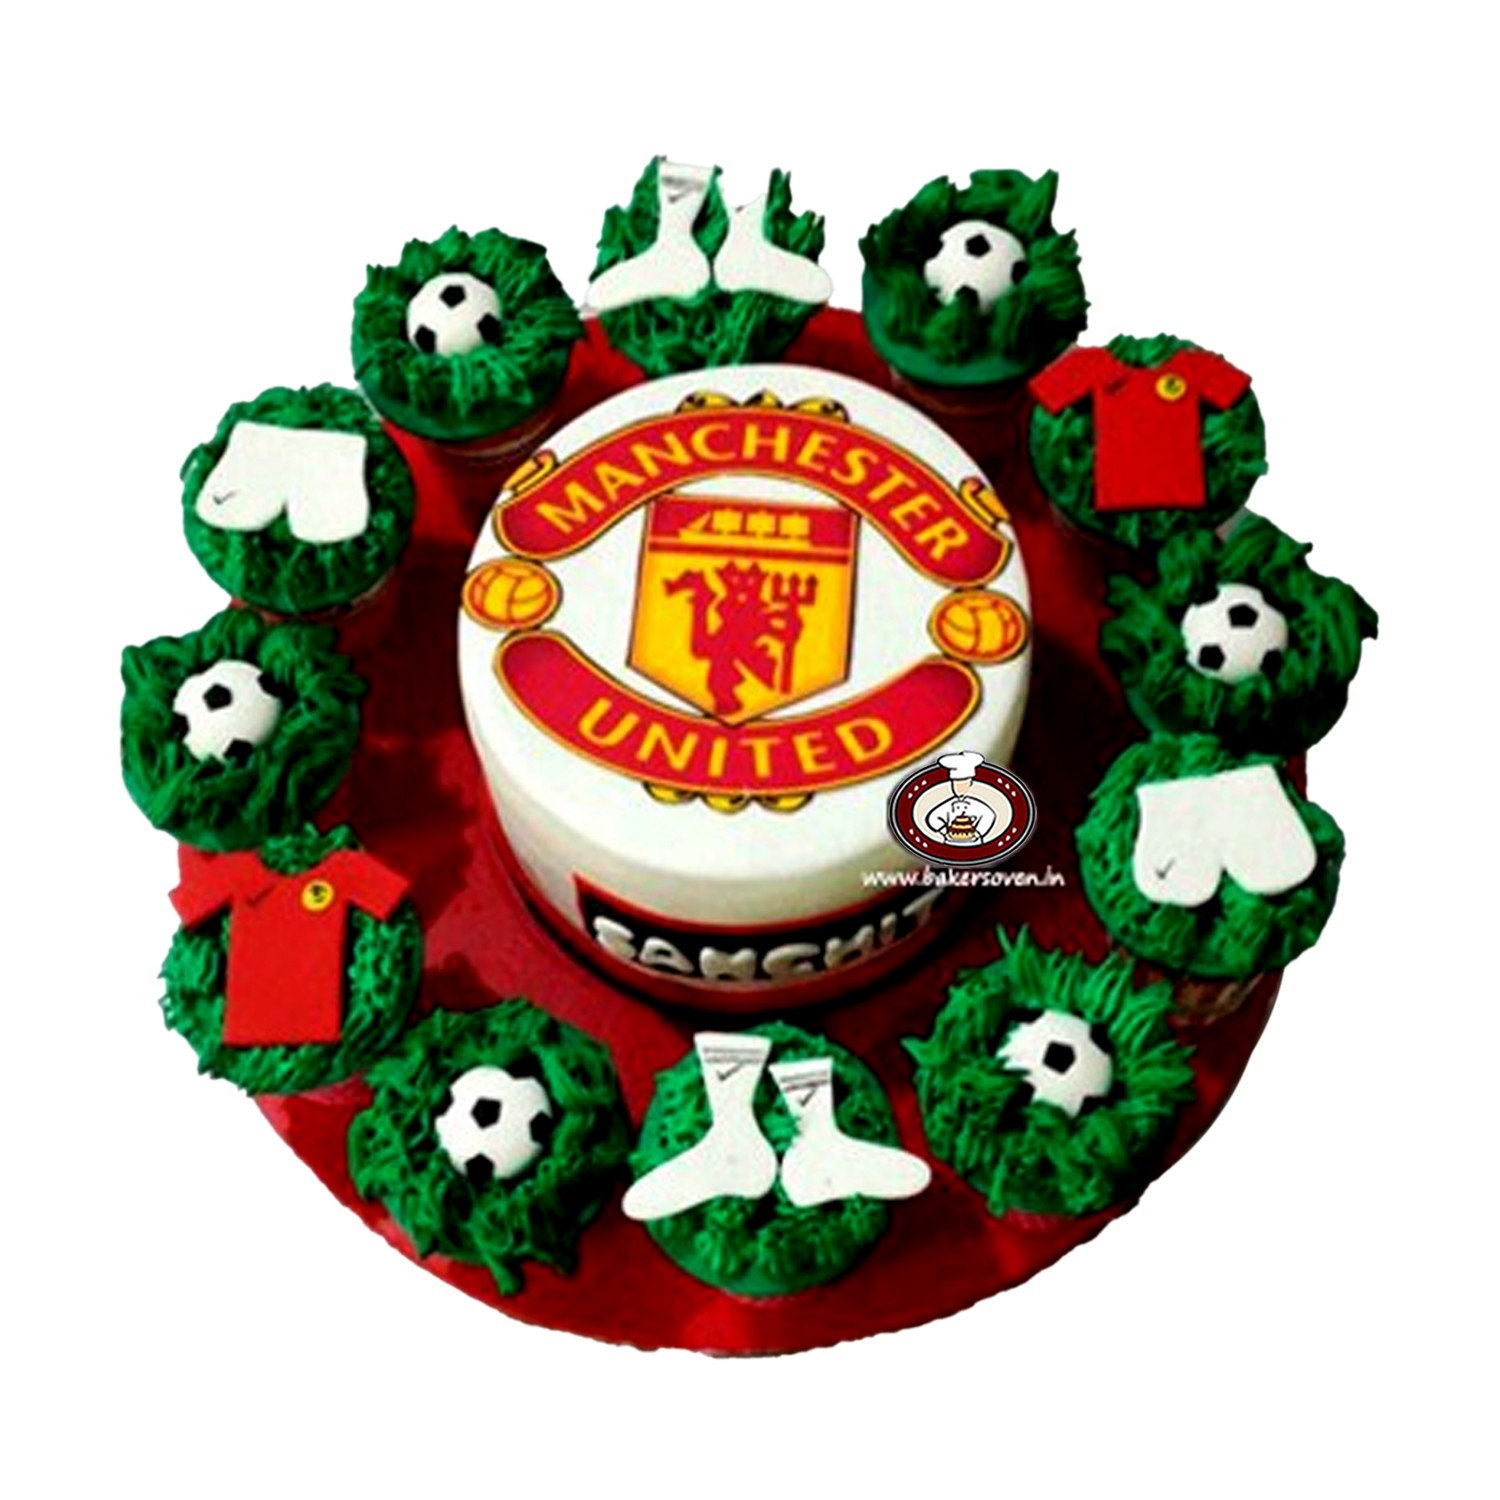 Manchester United - Decorated Cake by Anchored in Cake - CakesDecor